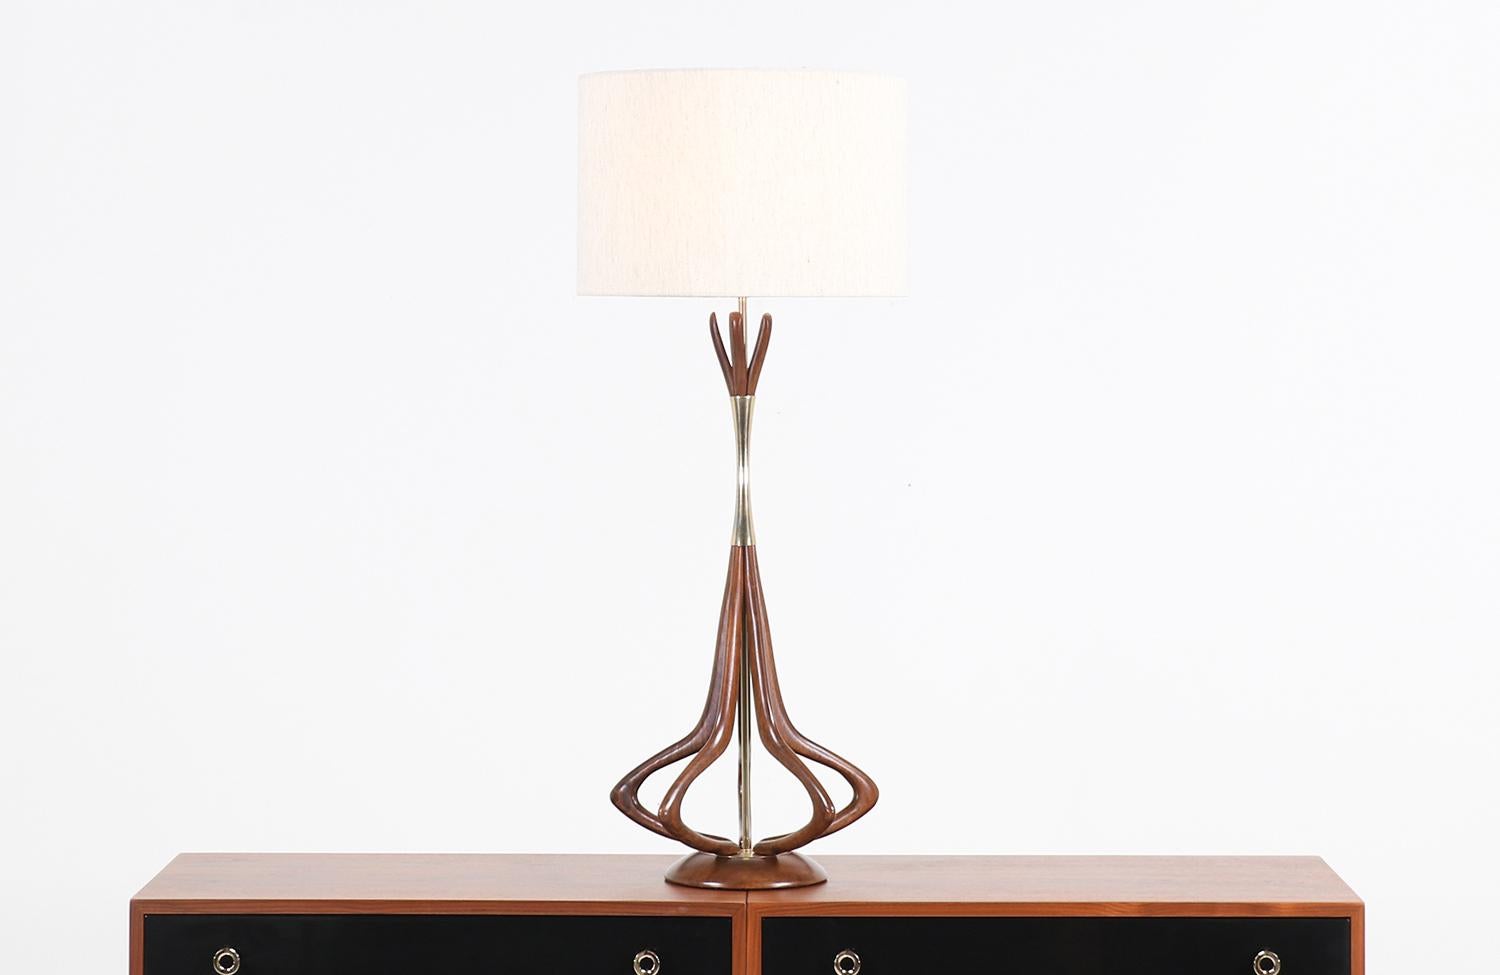 Stylish sculpted modern table lamp designed and manufactured by Modeline of California in the United States, circa 1960s. This 3-dimensional desk lamp features a sculpted walnut wood body with five vertical prongs that are joined in the upper part